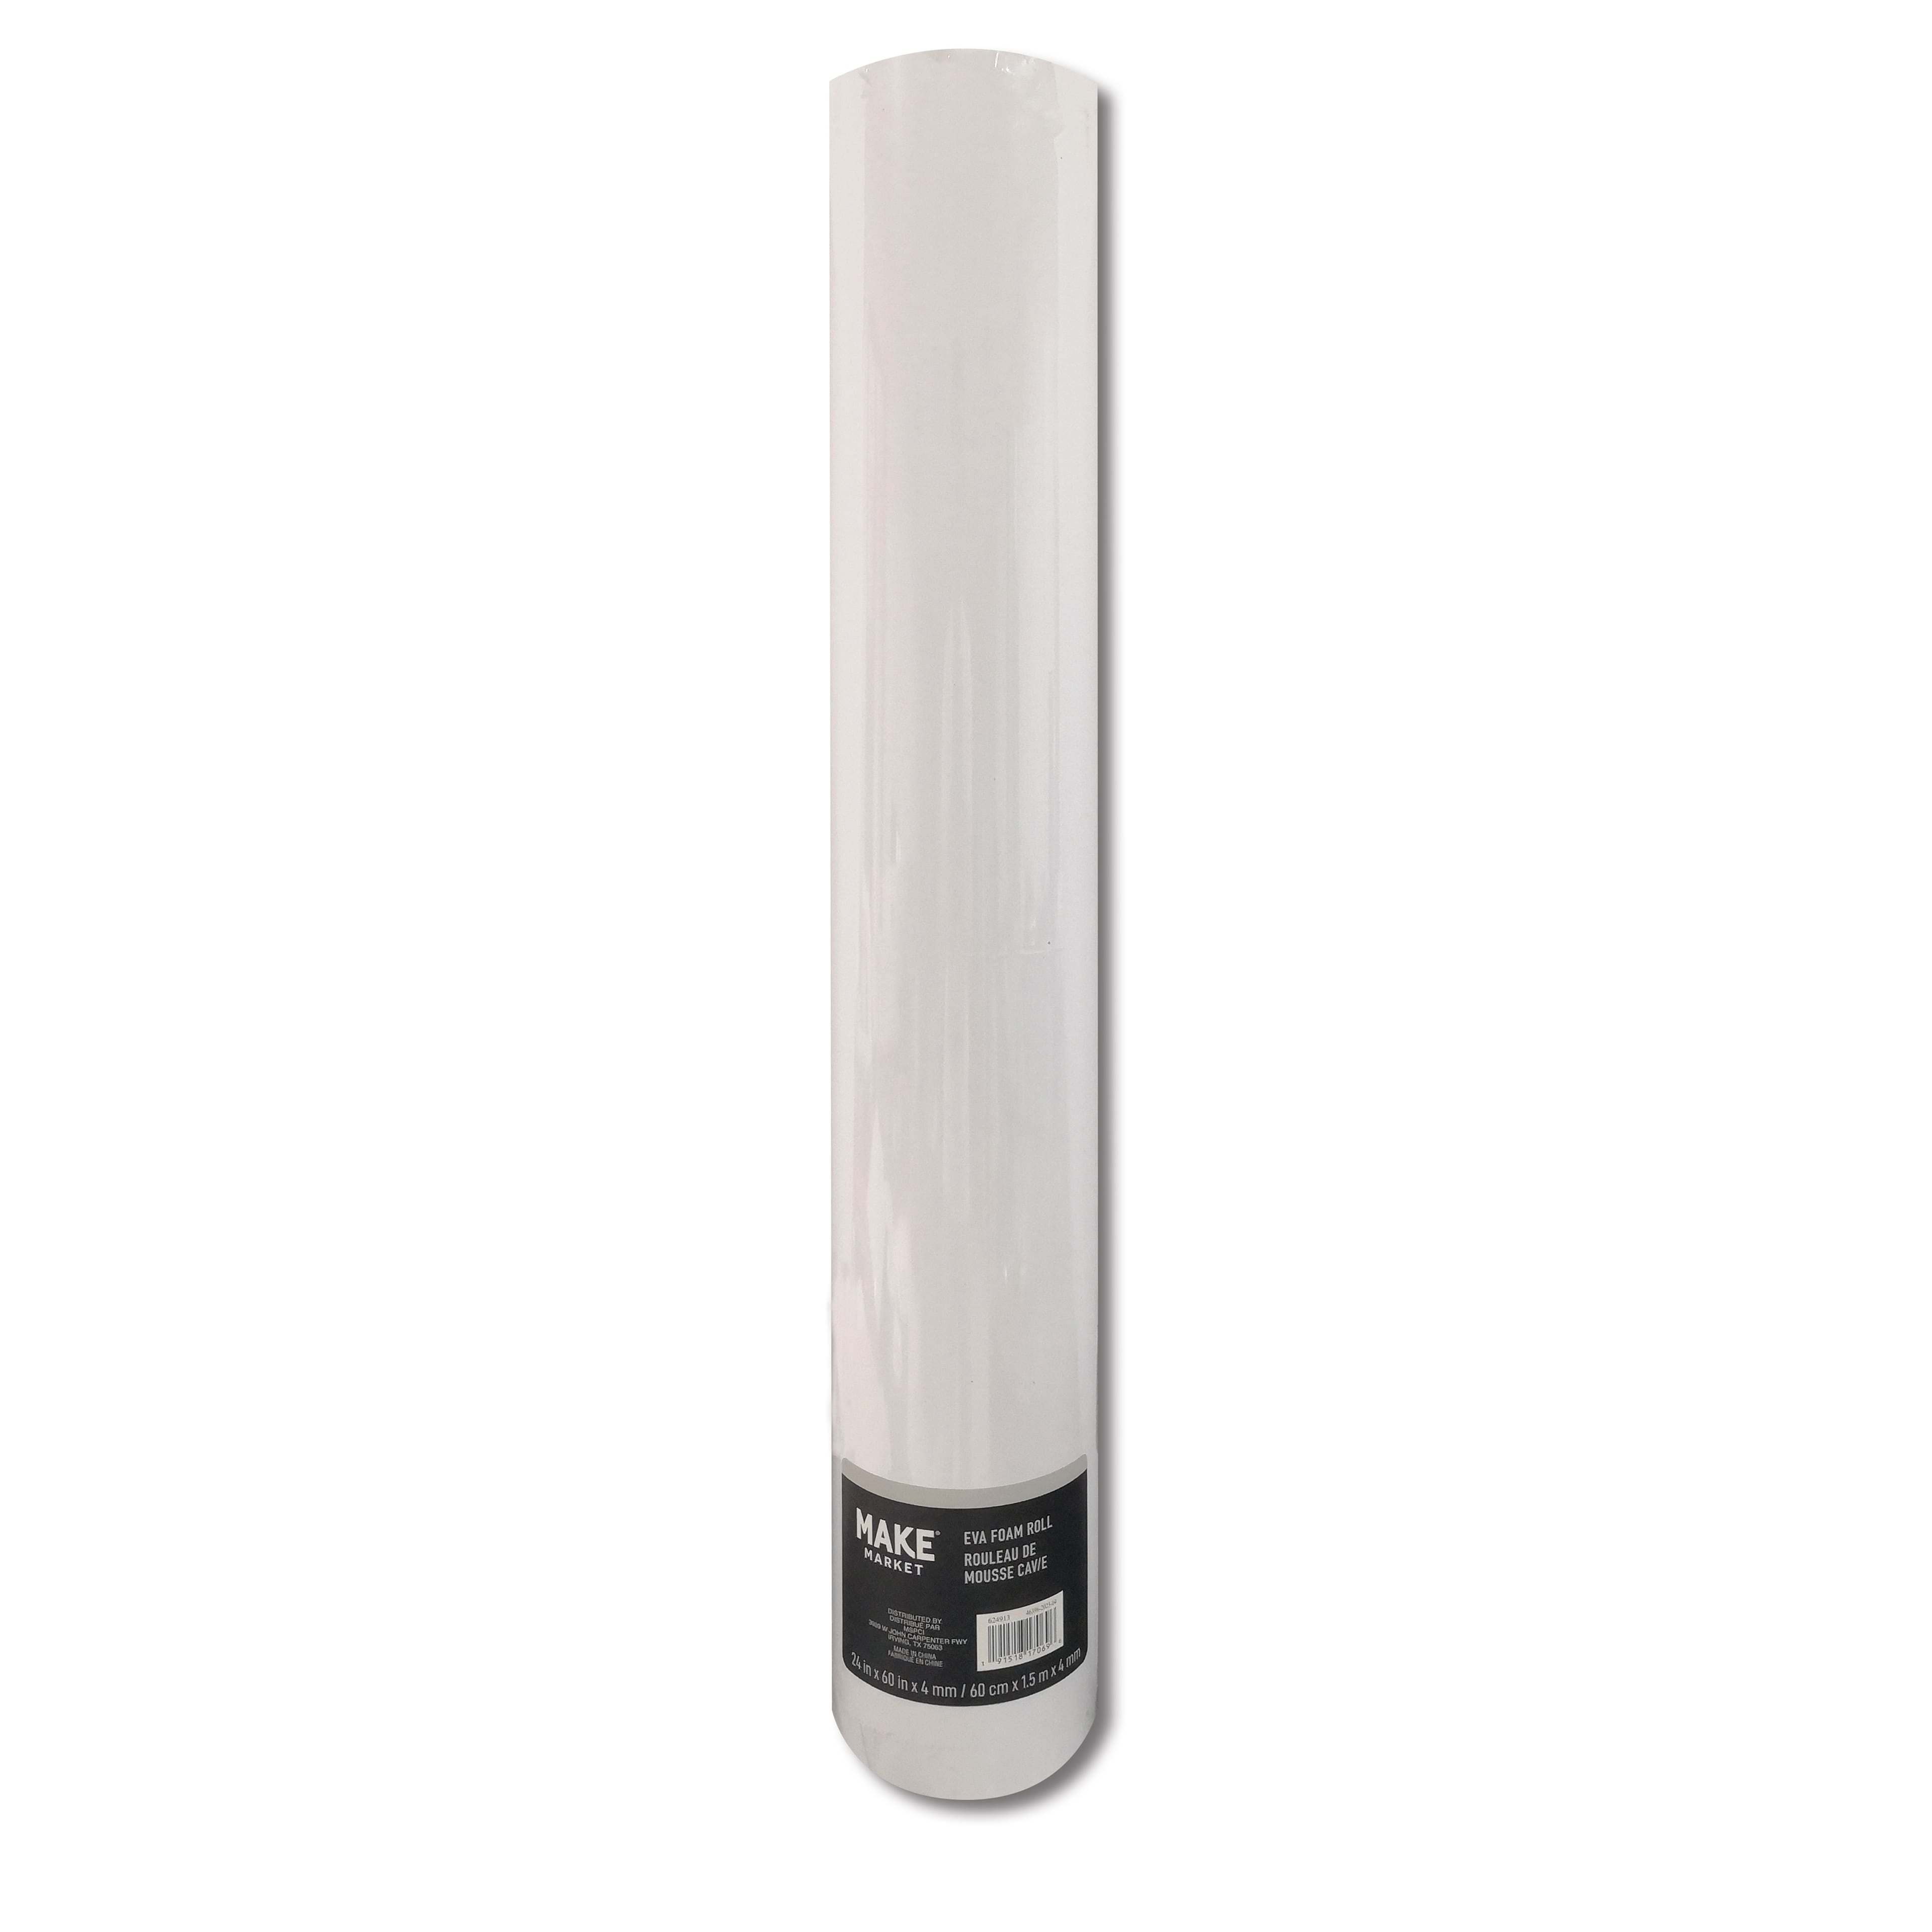 Buy Standard drawing paper roll, white online at Modulor